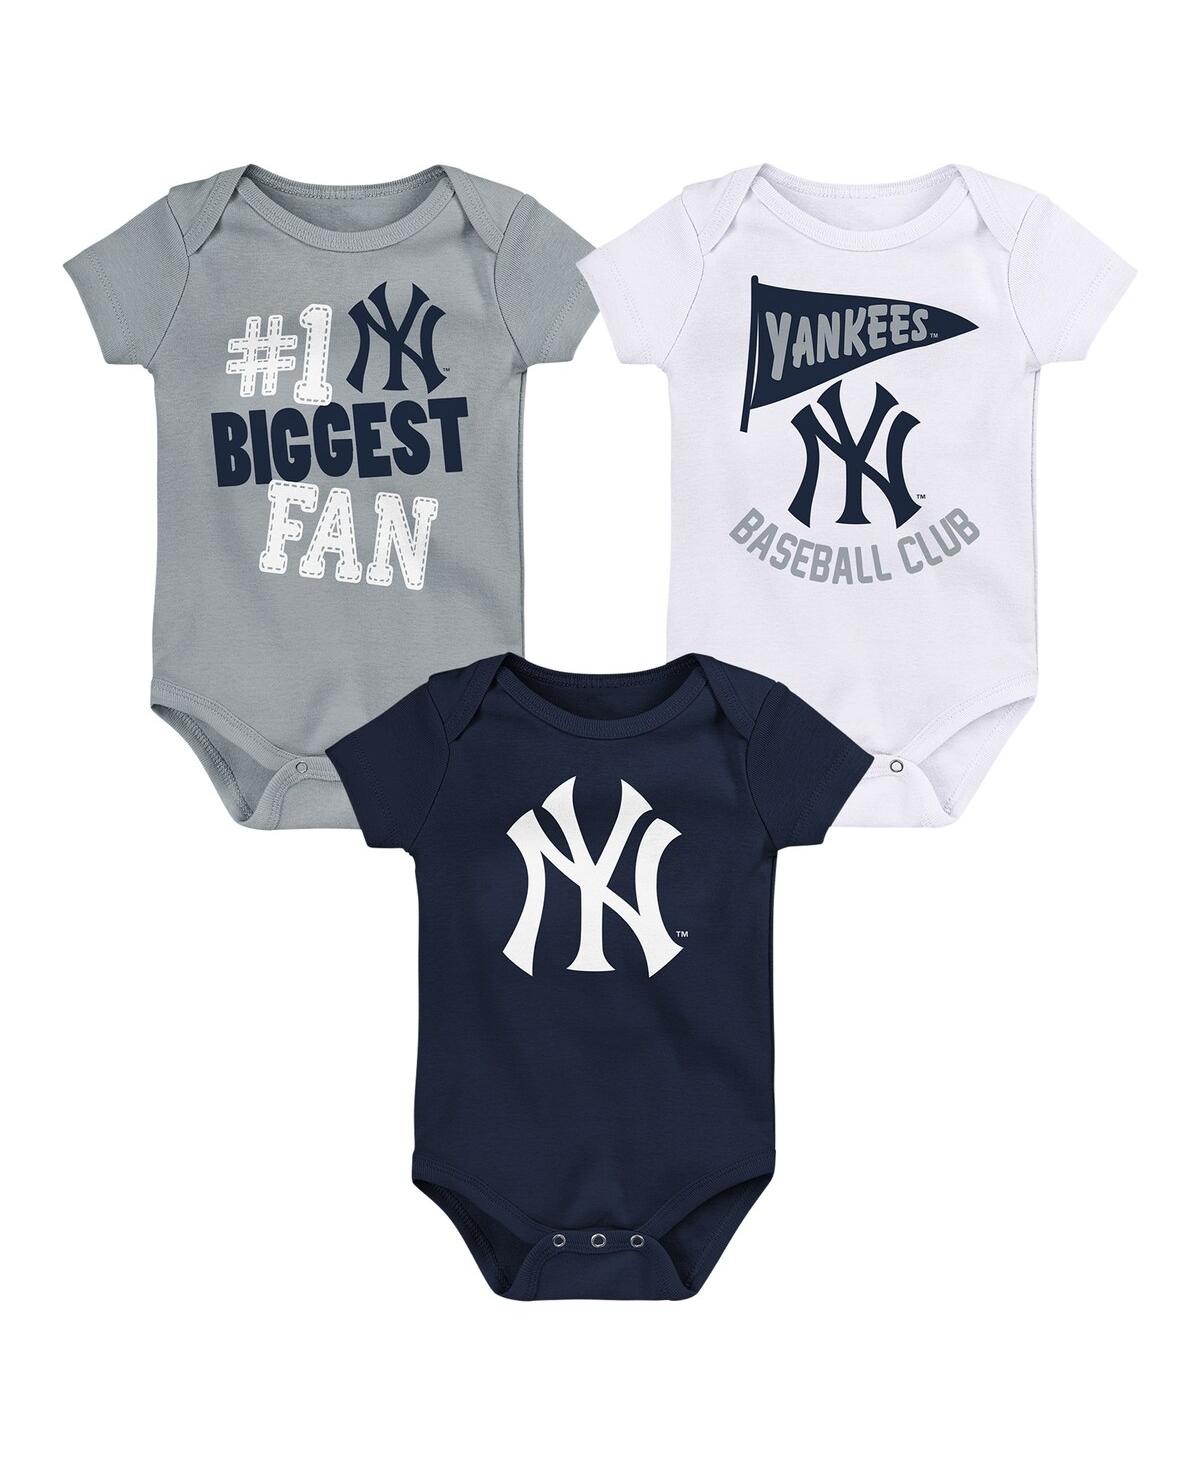 Outerstuff Baby Boys And Girls  New York Yankees Fan Pennant 3-pack Bodysuit Set In Navy,gray,white